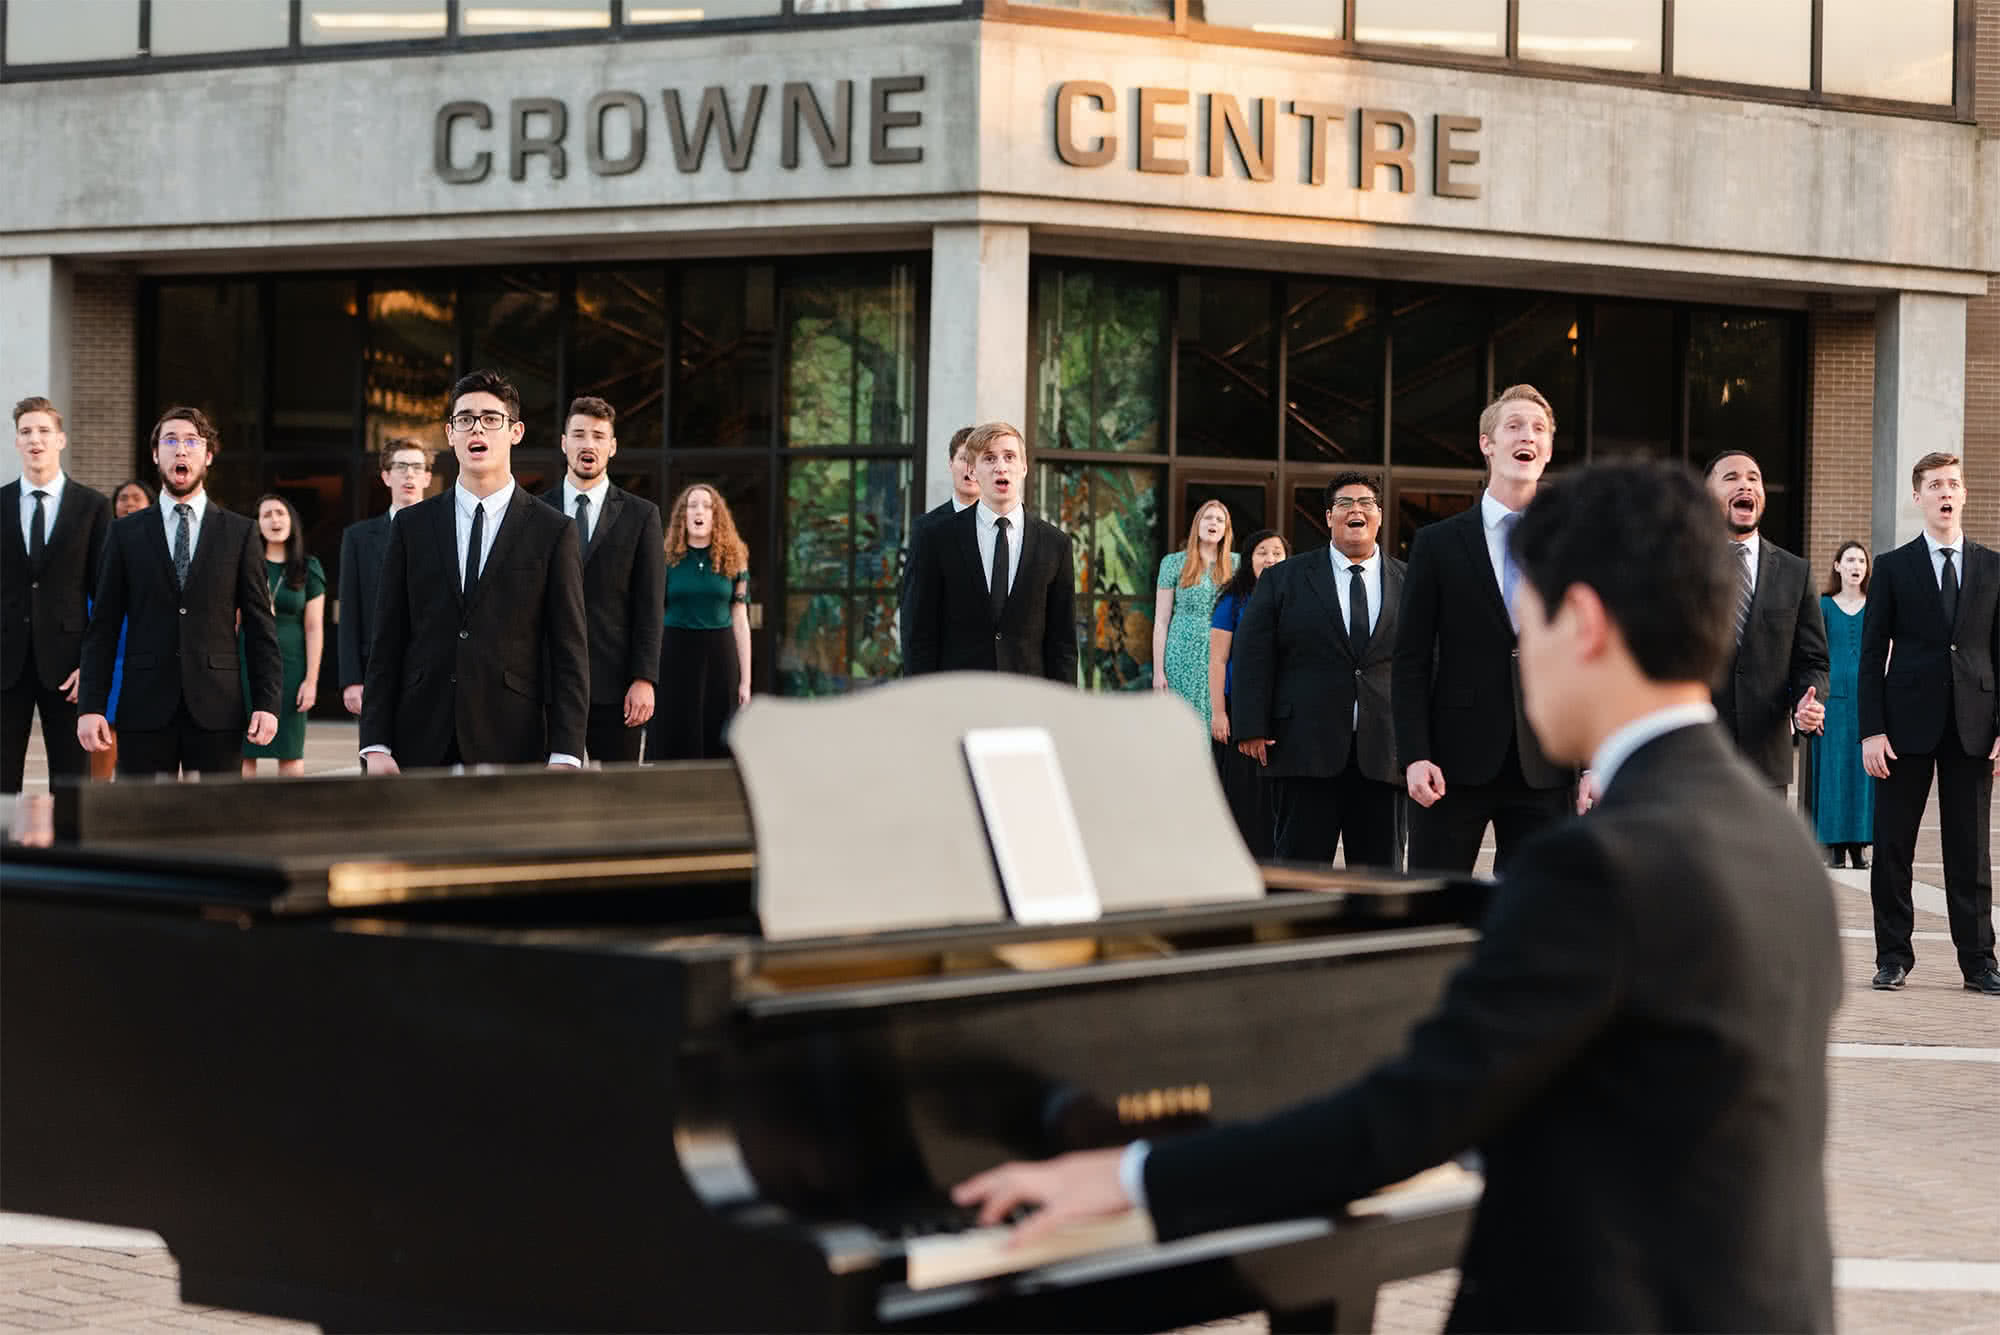 Choir and piano in front of Crowne Centre